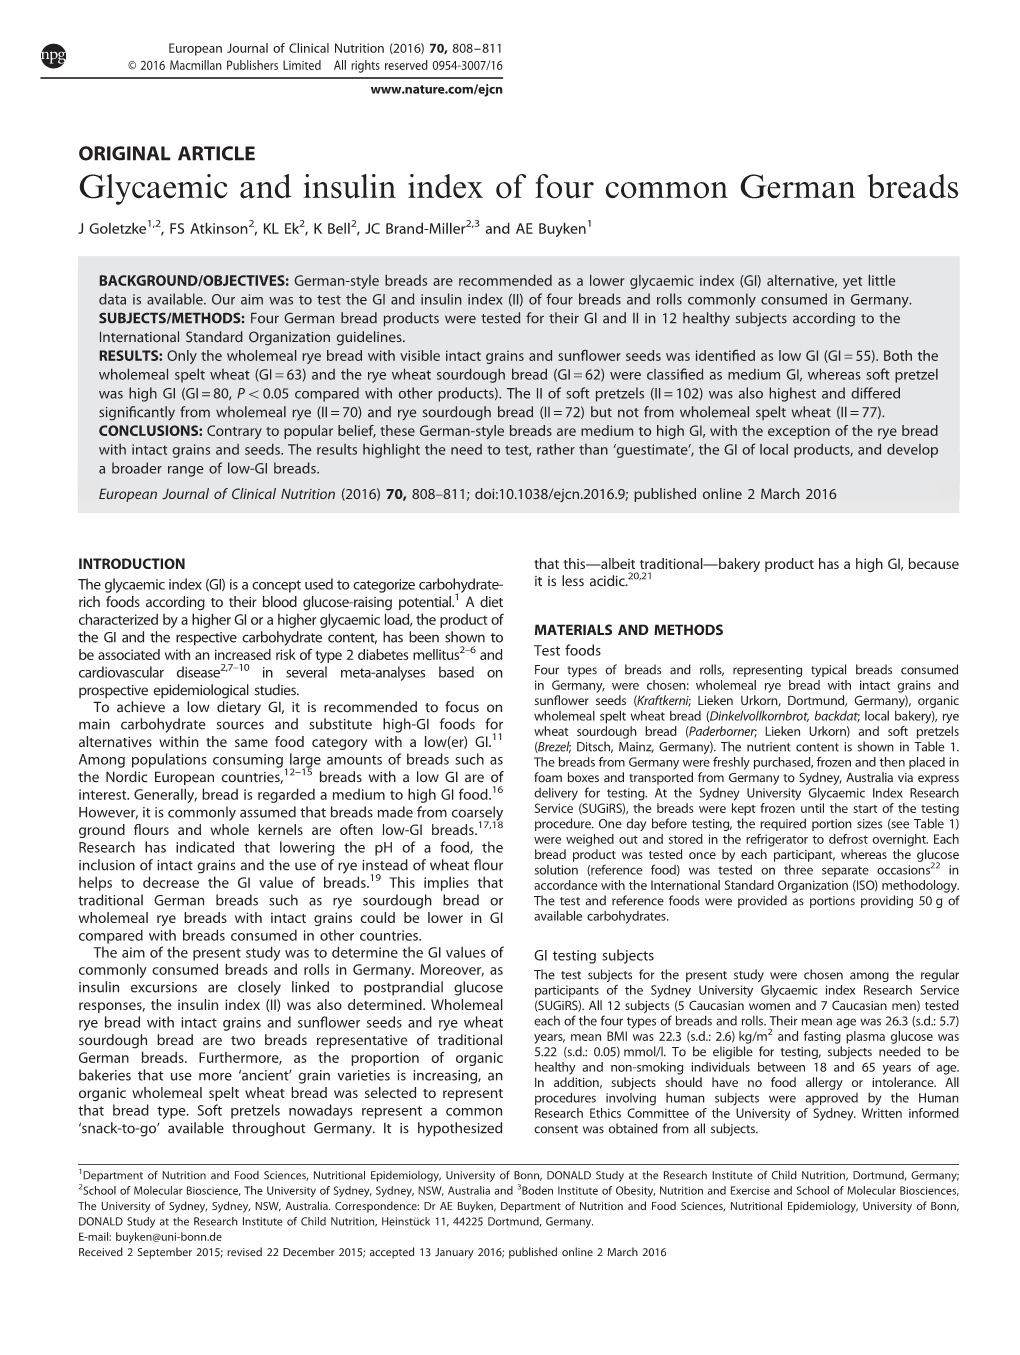 Glycaemic and Insulin Index of Four Common German Breads